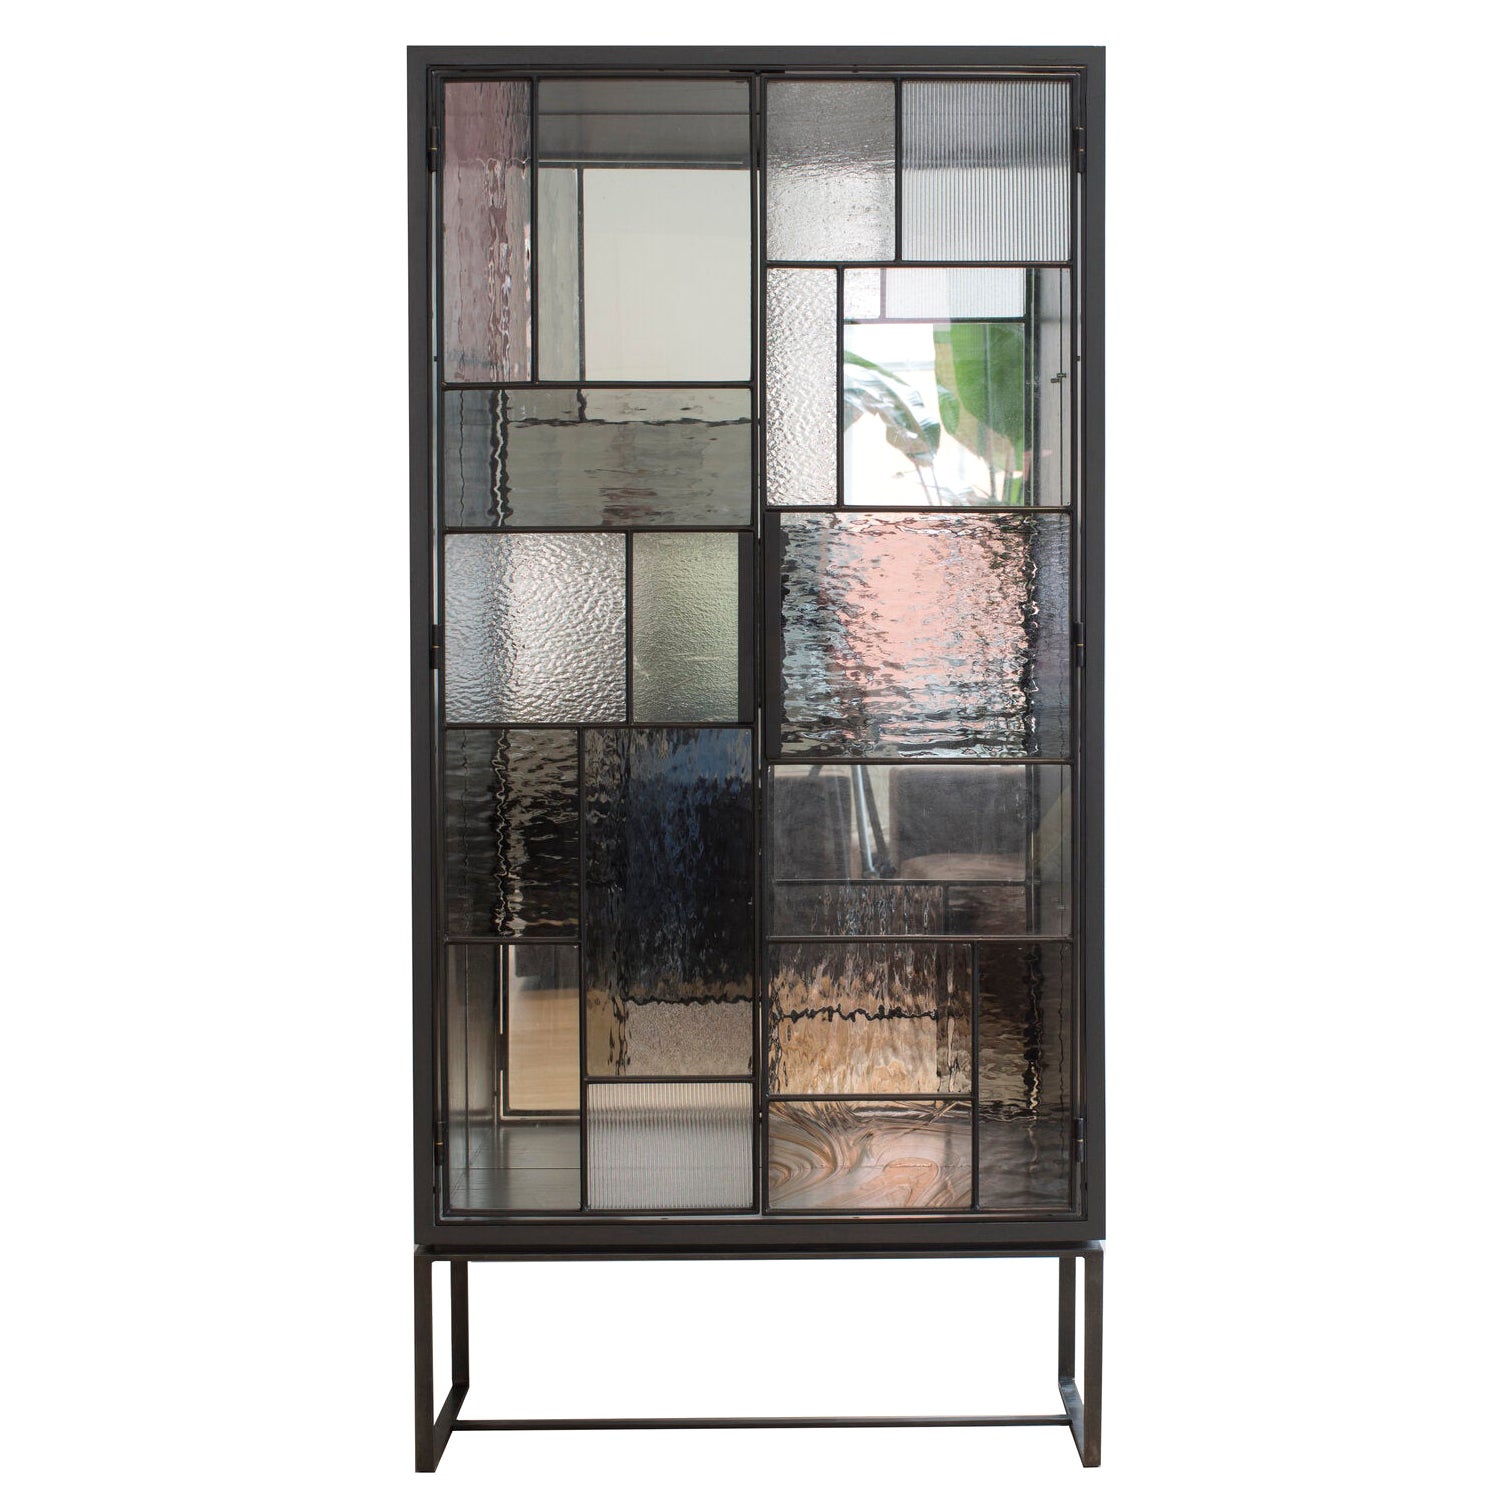 Modern Industrial 2-Door Vitrine with Black Metal Frame by Ercole Home